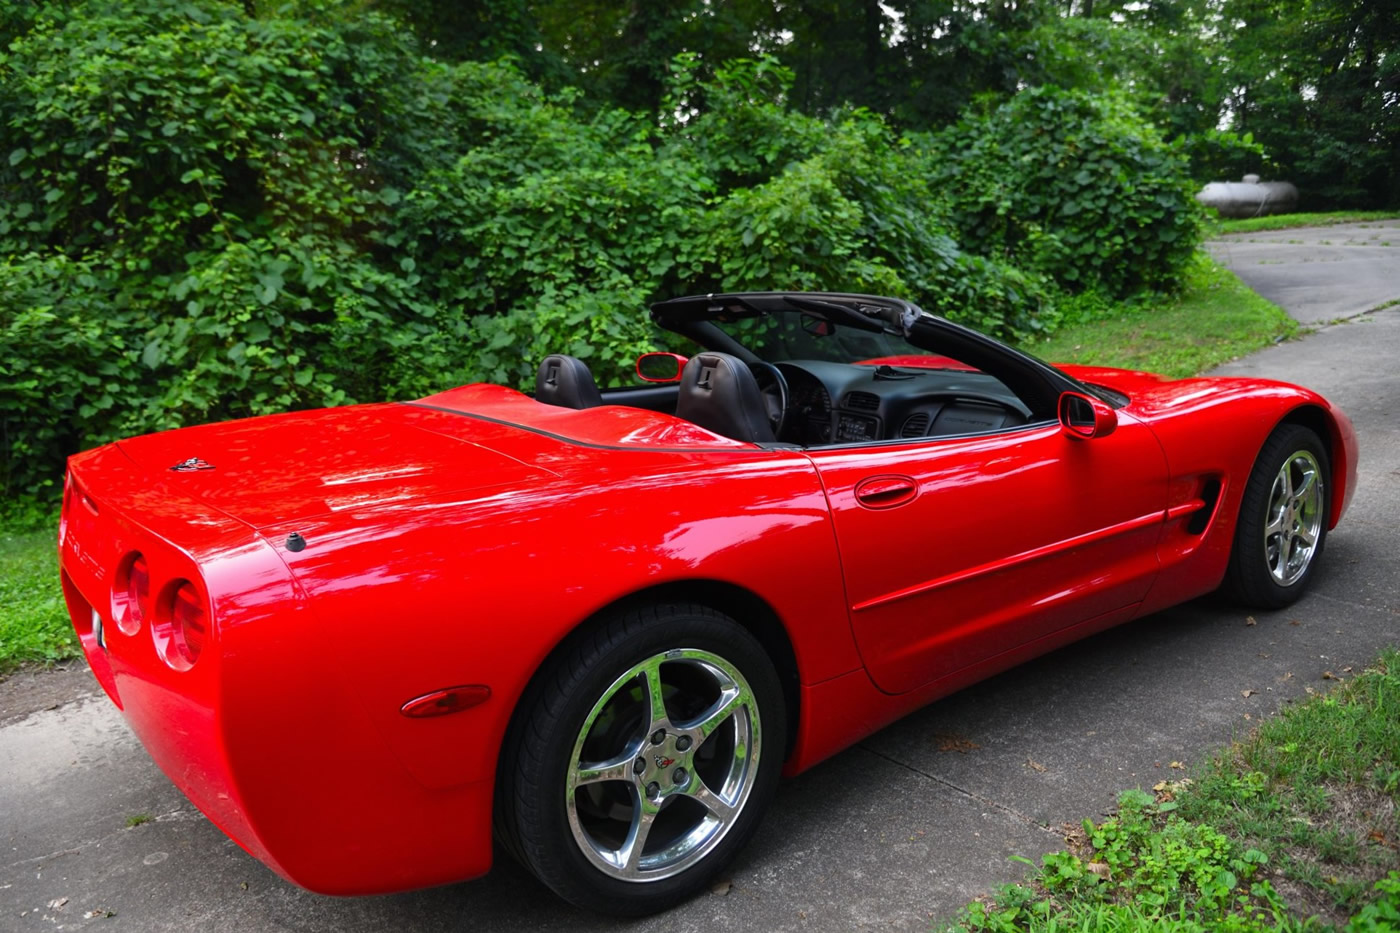 2000 Corvette Convertible in Torch Red